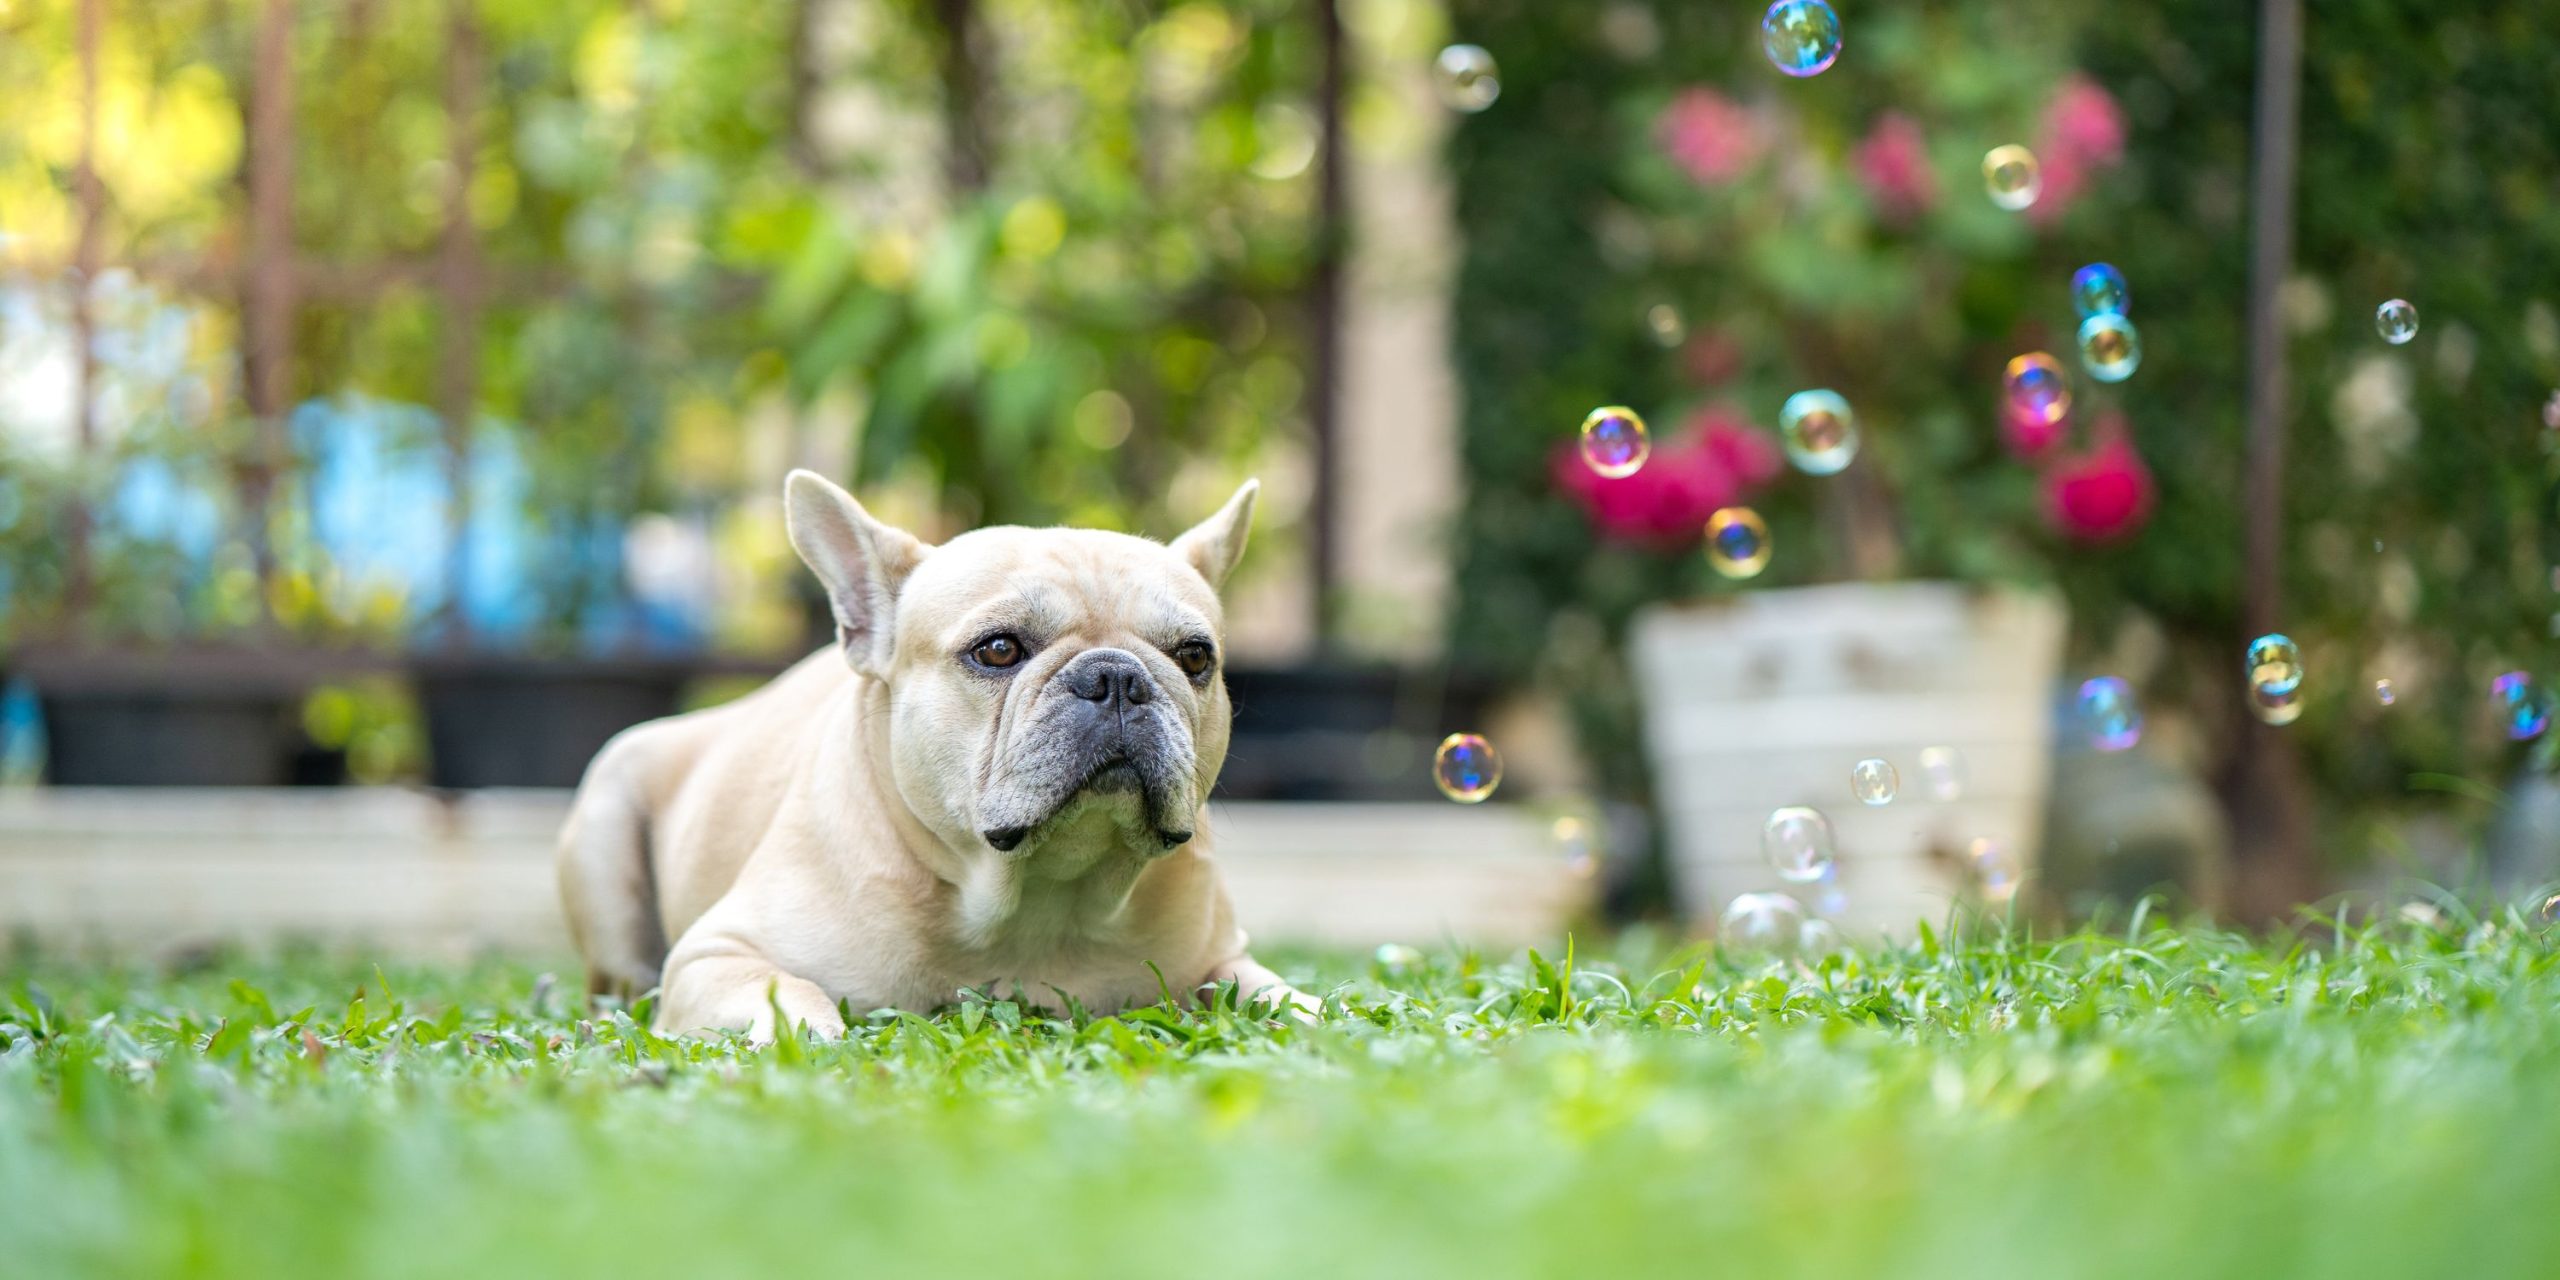 How To Make Dog-safe Bubbles – Ingredients, Materials & Procedure